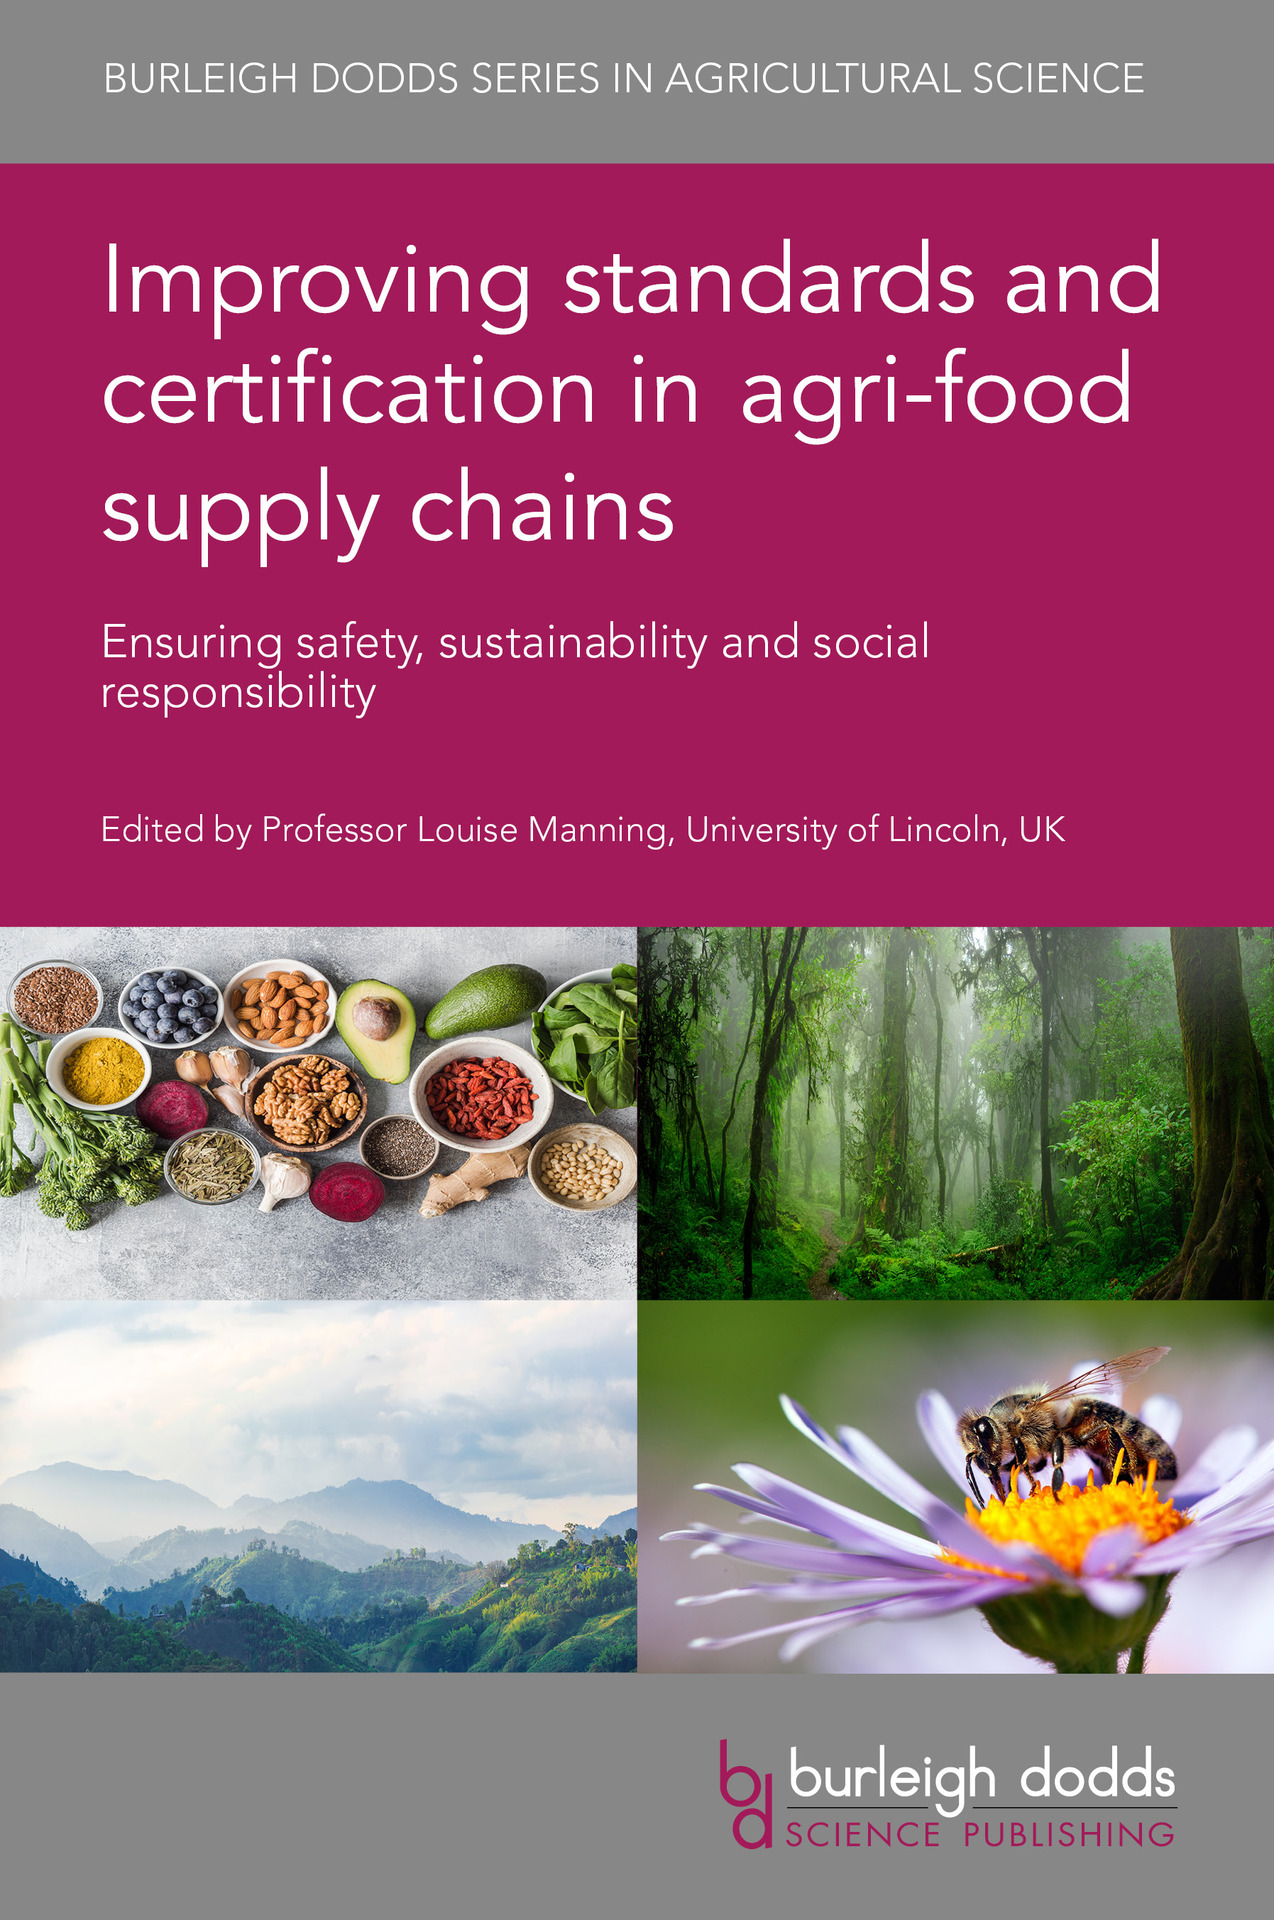 Improving standards and certification in agri-food supply chains: Ensuring safety, sustainability and social responsibility